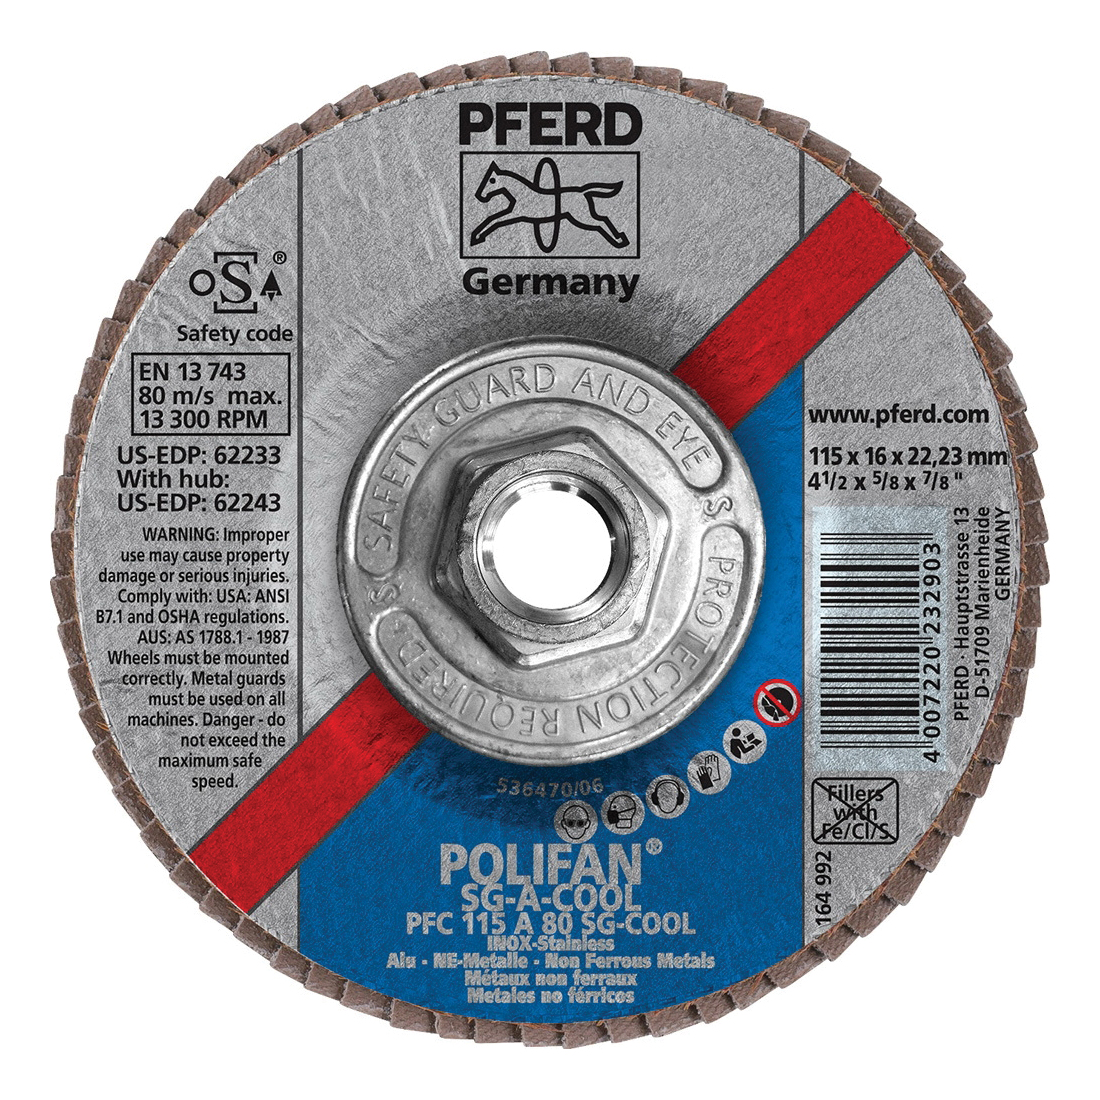 PFERD Polifan® 62243 Performance Line SG A-COOL Threaded Coated Abrasive Flap Disc, 4-1/2 in Dia, 80 Grit, Aluminum Oxide Abrasive, Type 29 Conical Disc